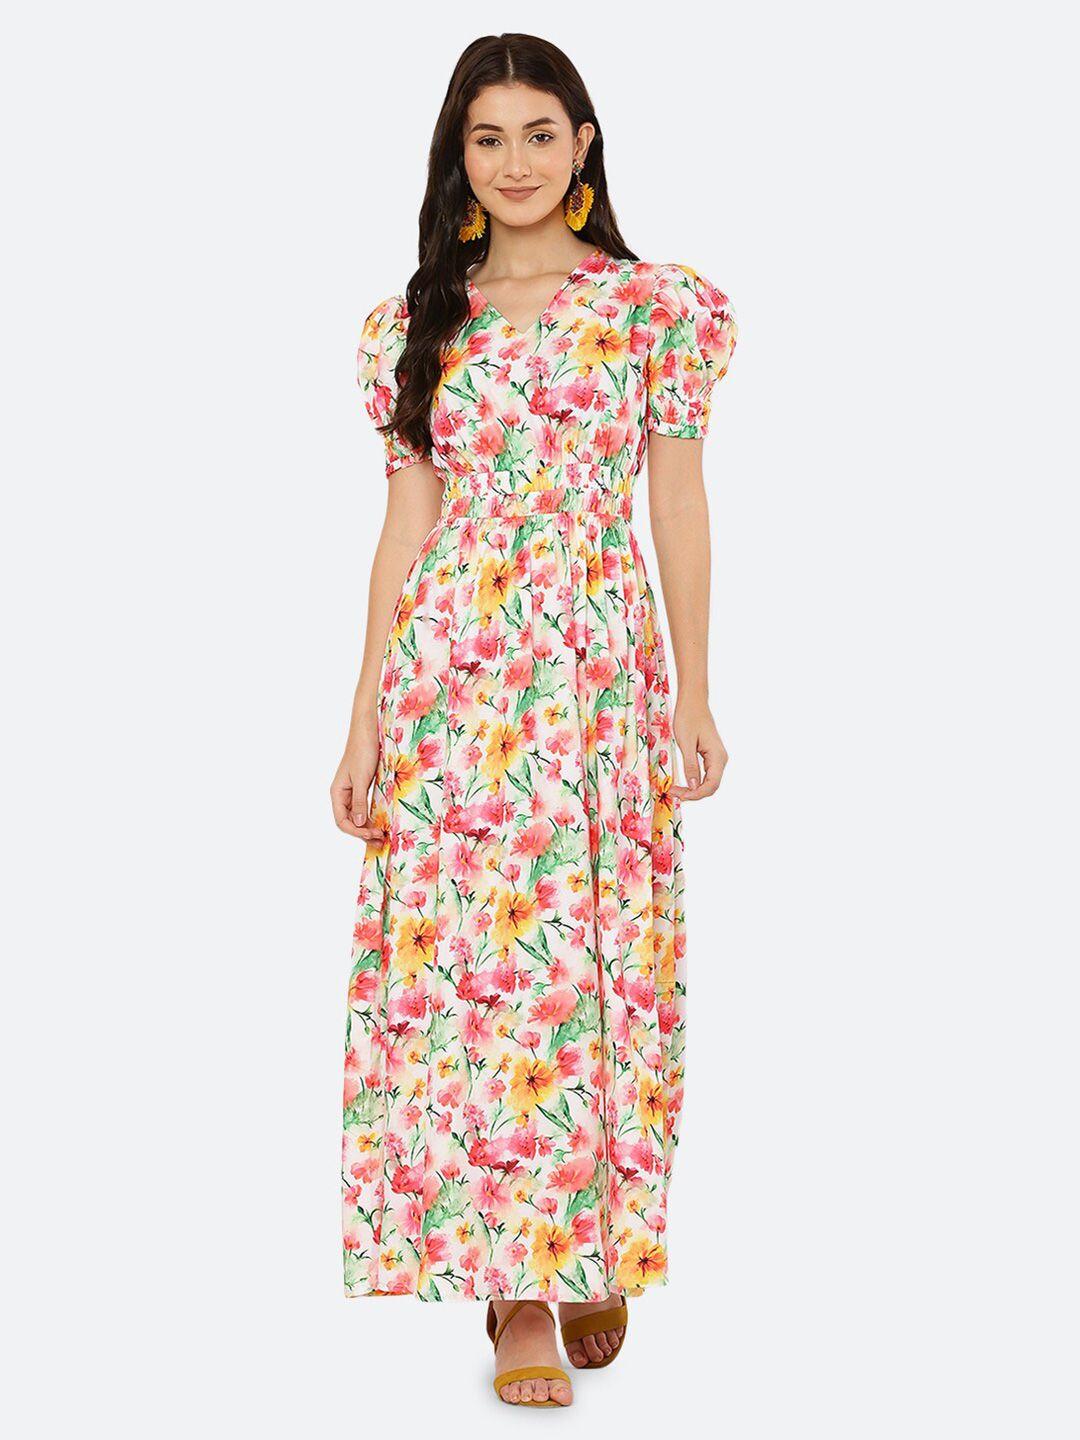 raassio women off white & pink floral crepe maxi dress